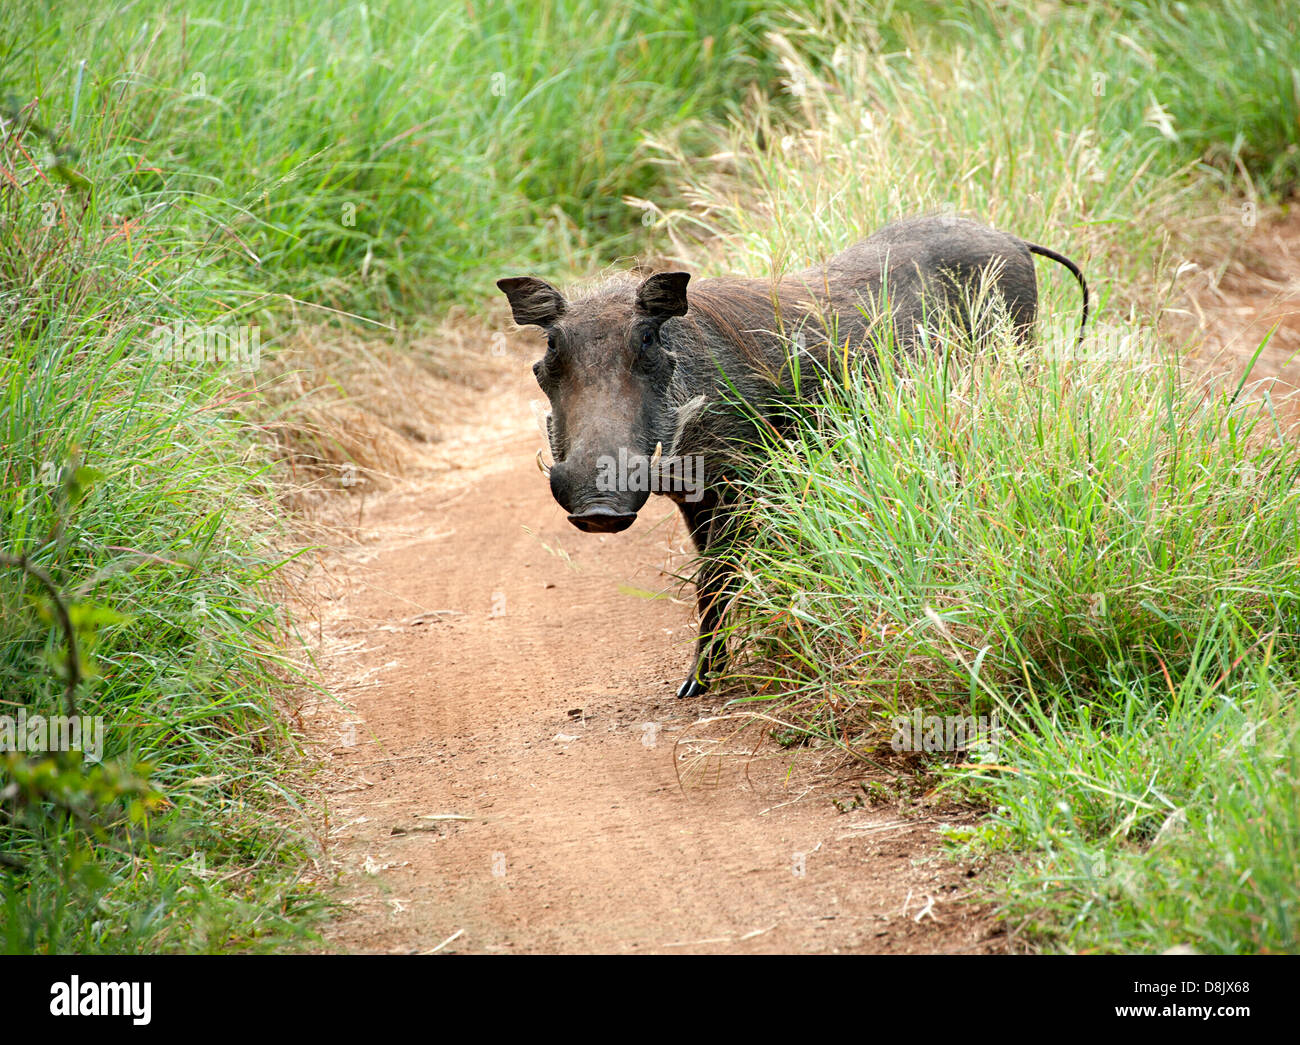 An inquisitive looking warthog in Thanda Game Reserve, South Africa. Stock Photo